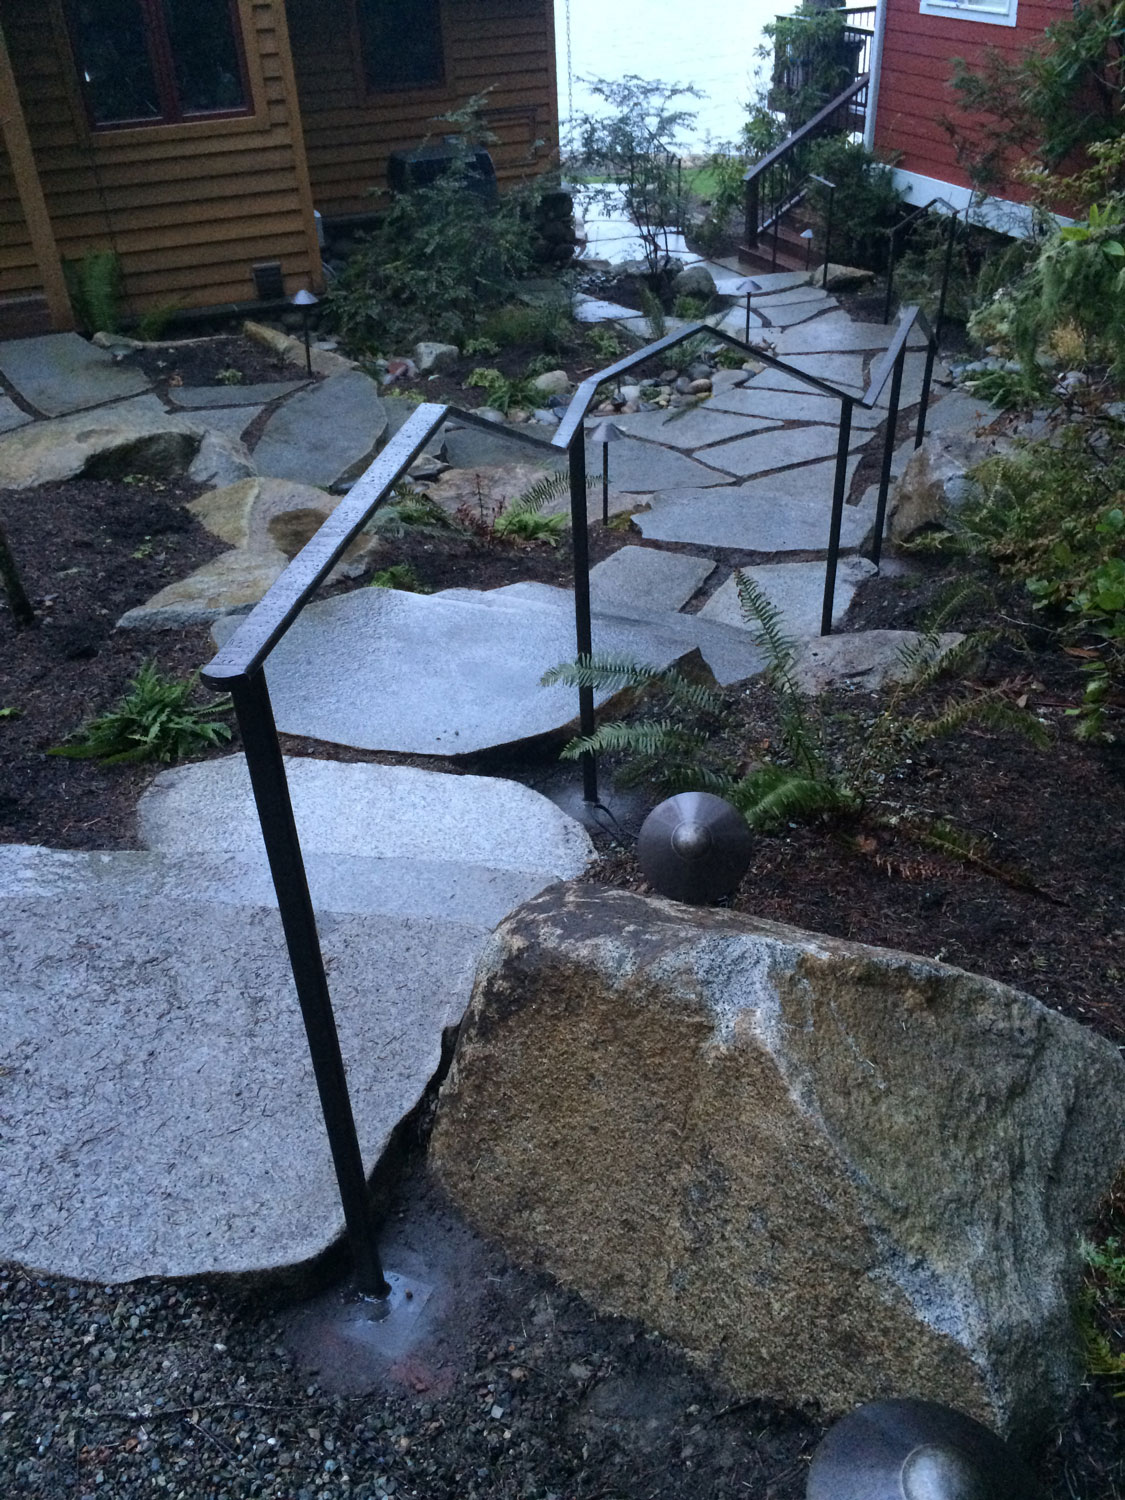 Hand Forged Iron Handrails - Series of Steps - Seattle, WA